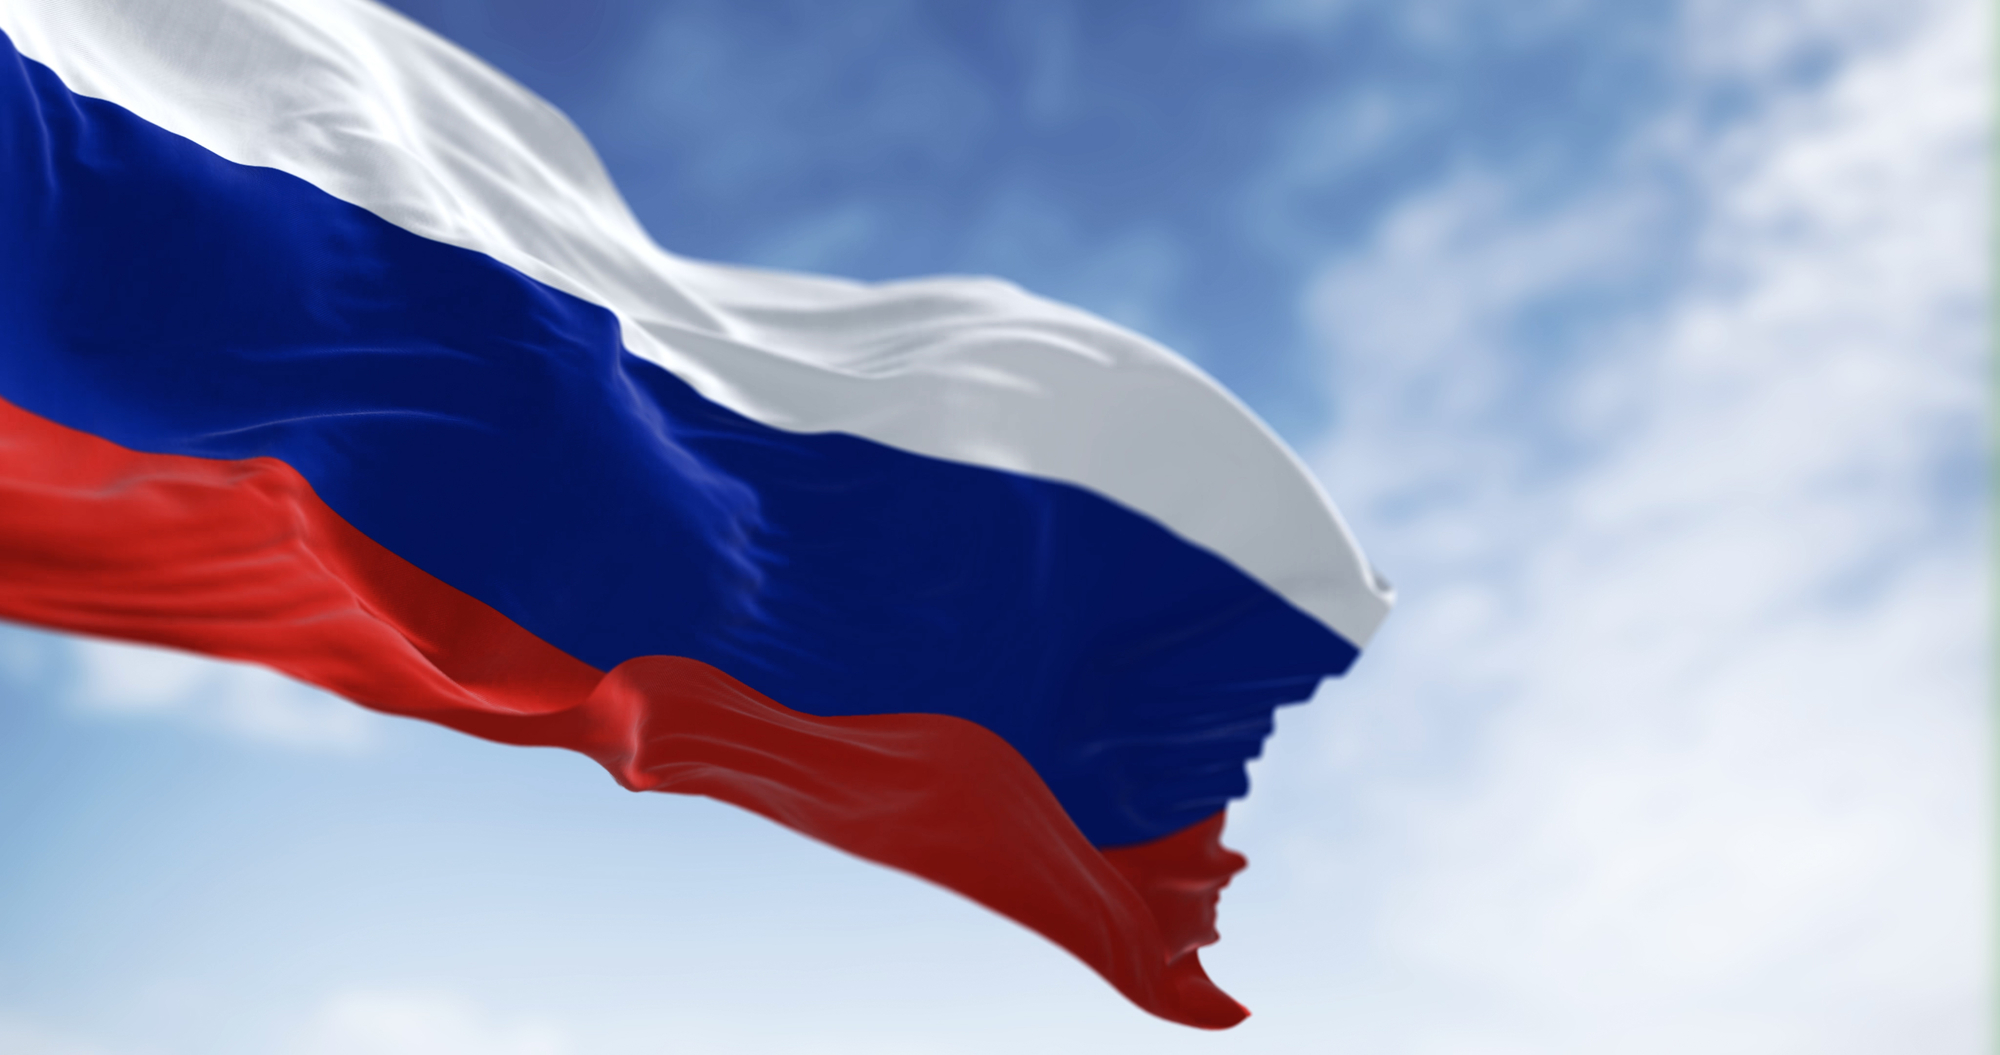 Three National Flags Of Russia Waving In The Wind On A Clear Day